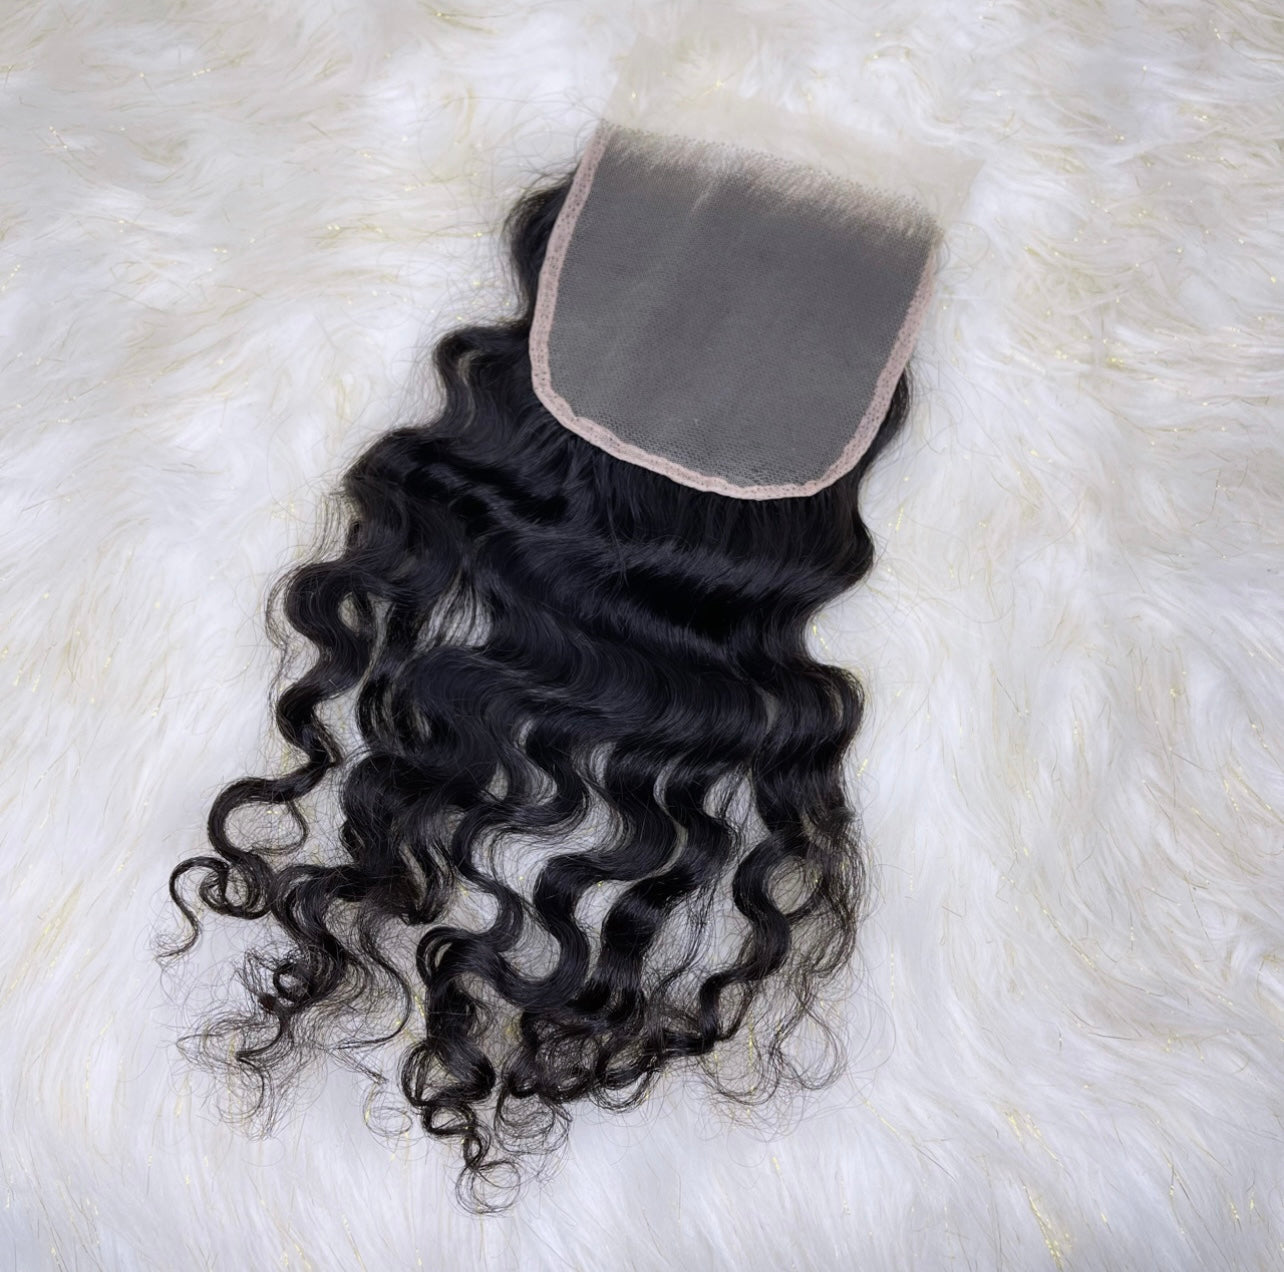 "5 x 5" Raw Indian Curly Closure